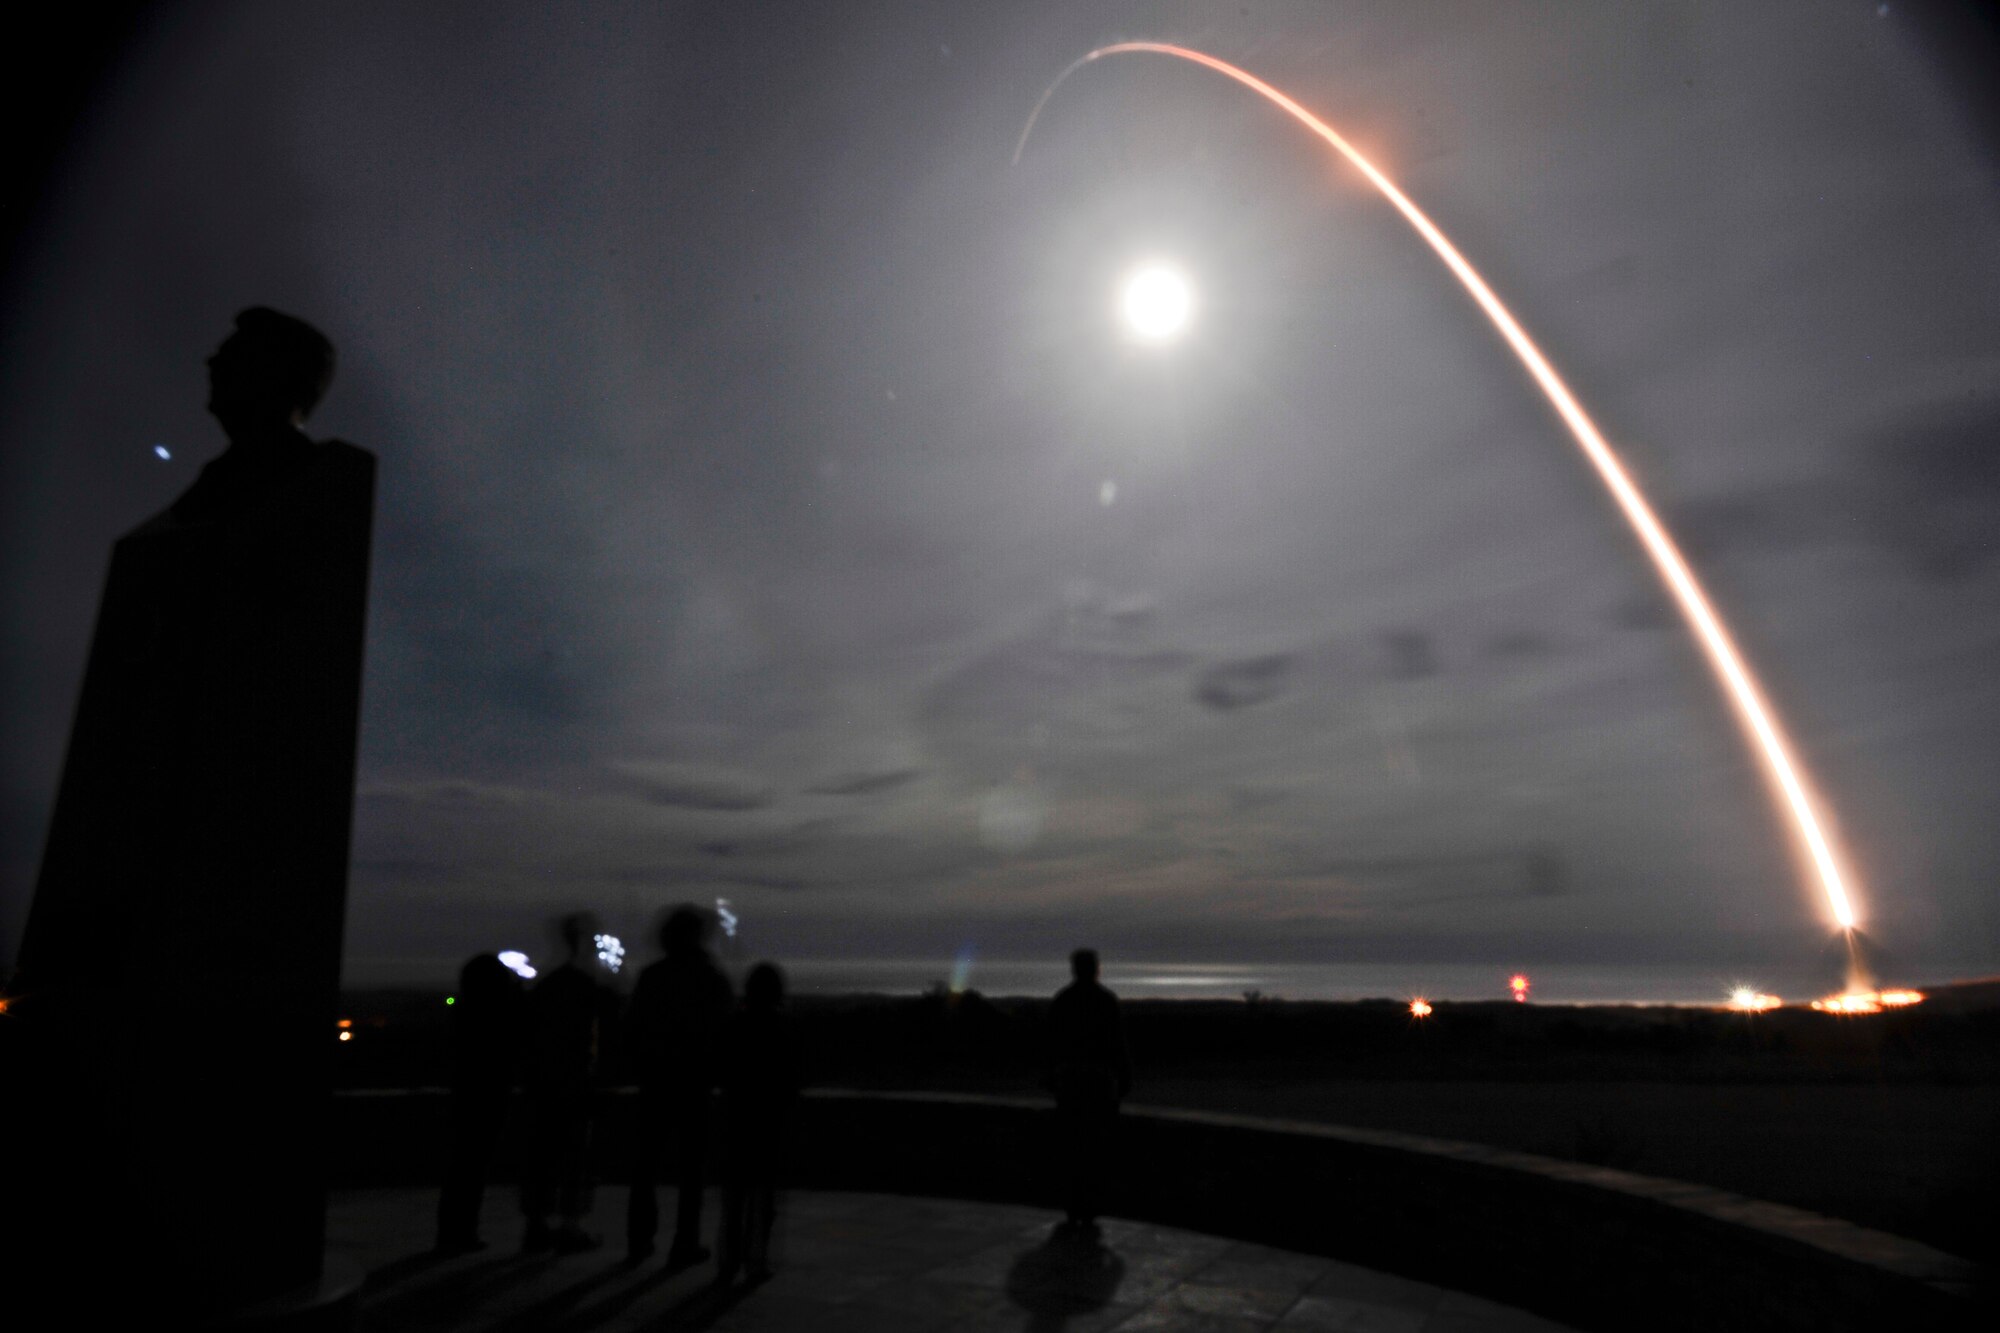 An unarmed Minuteman III intercontinental ballistic missile was launched during an operational test Dec. 17 at 4:36 a.m. from Vandenberg Air Force Base, Calif. Col. Keith Balts, the 30th Space Wing commander, was the launch decision authority. (U.S. Air Force photo/Airman 1st Class Yvonne Morales)